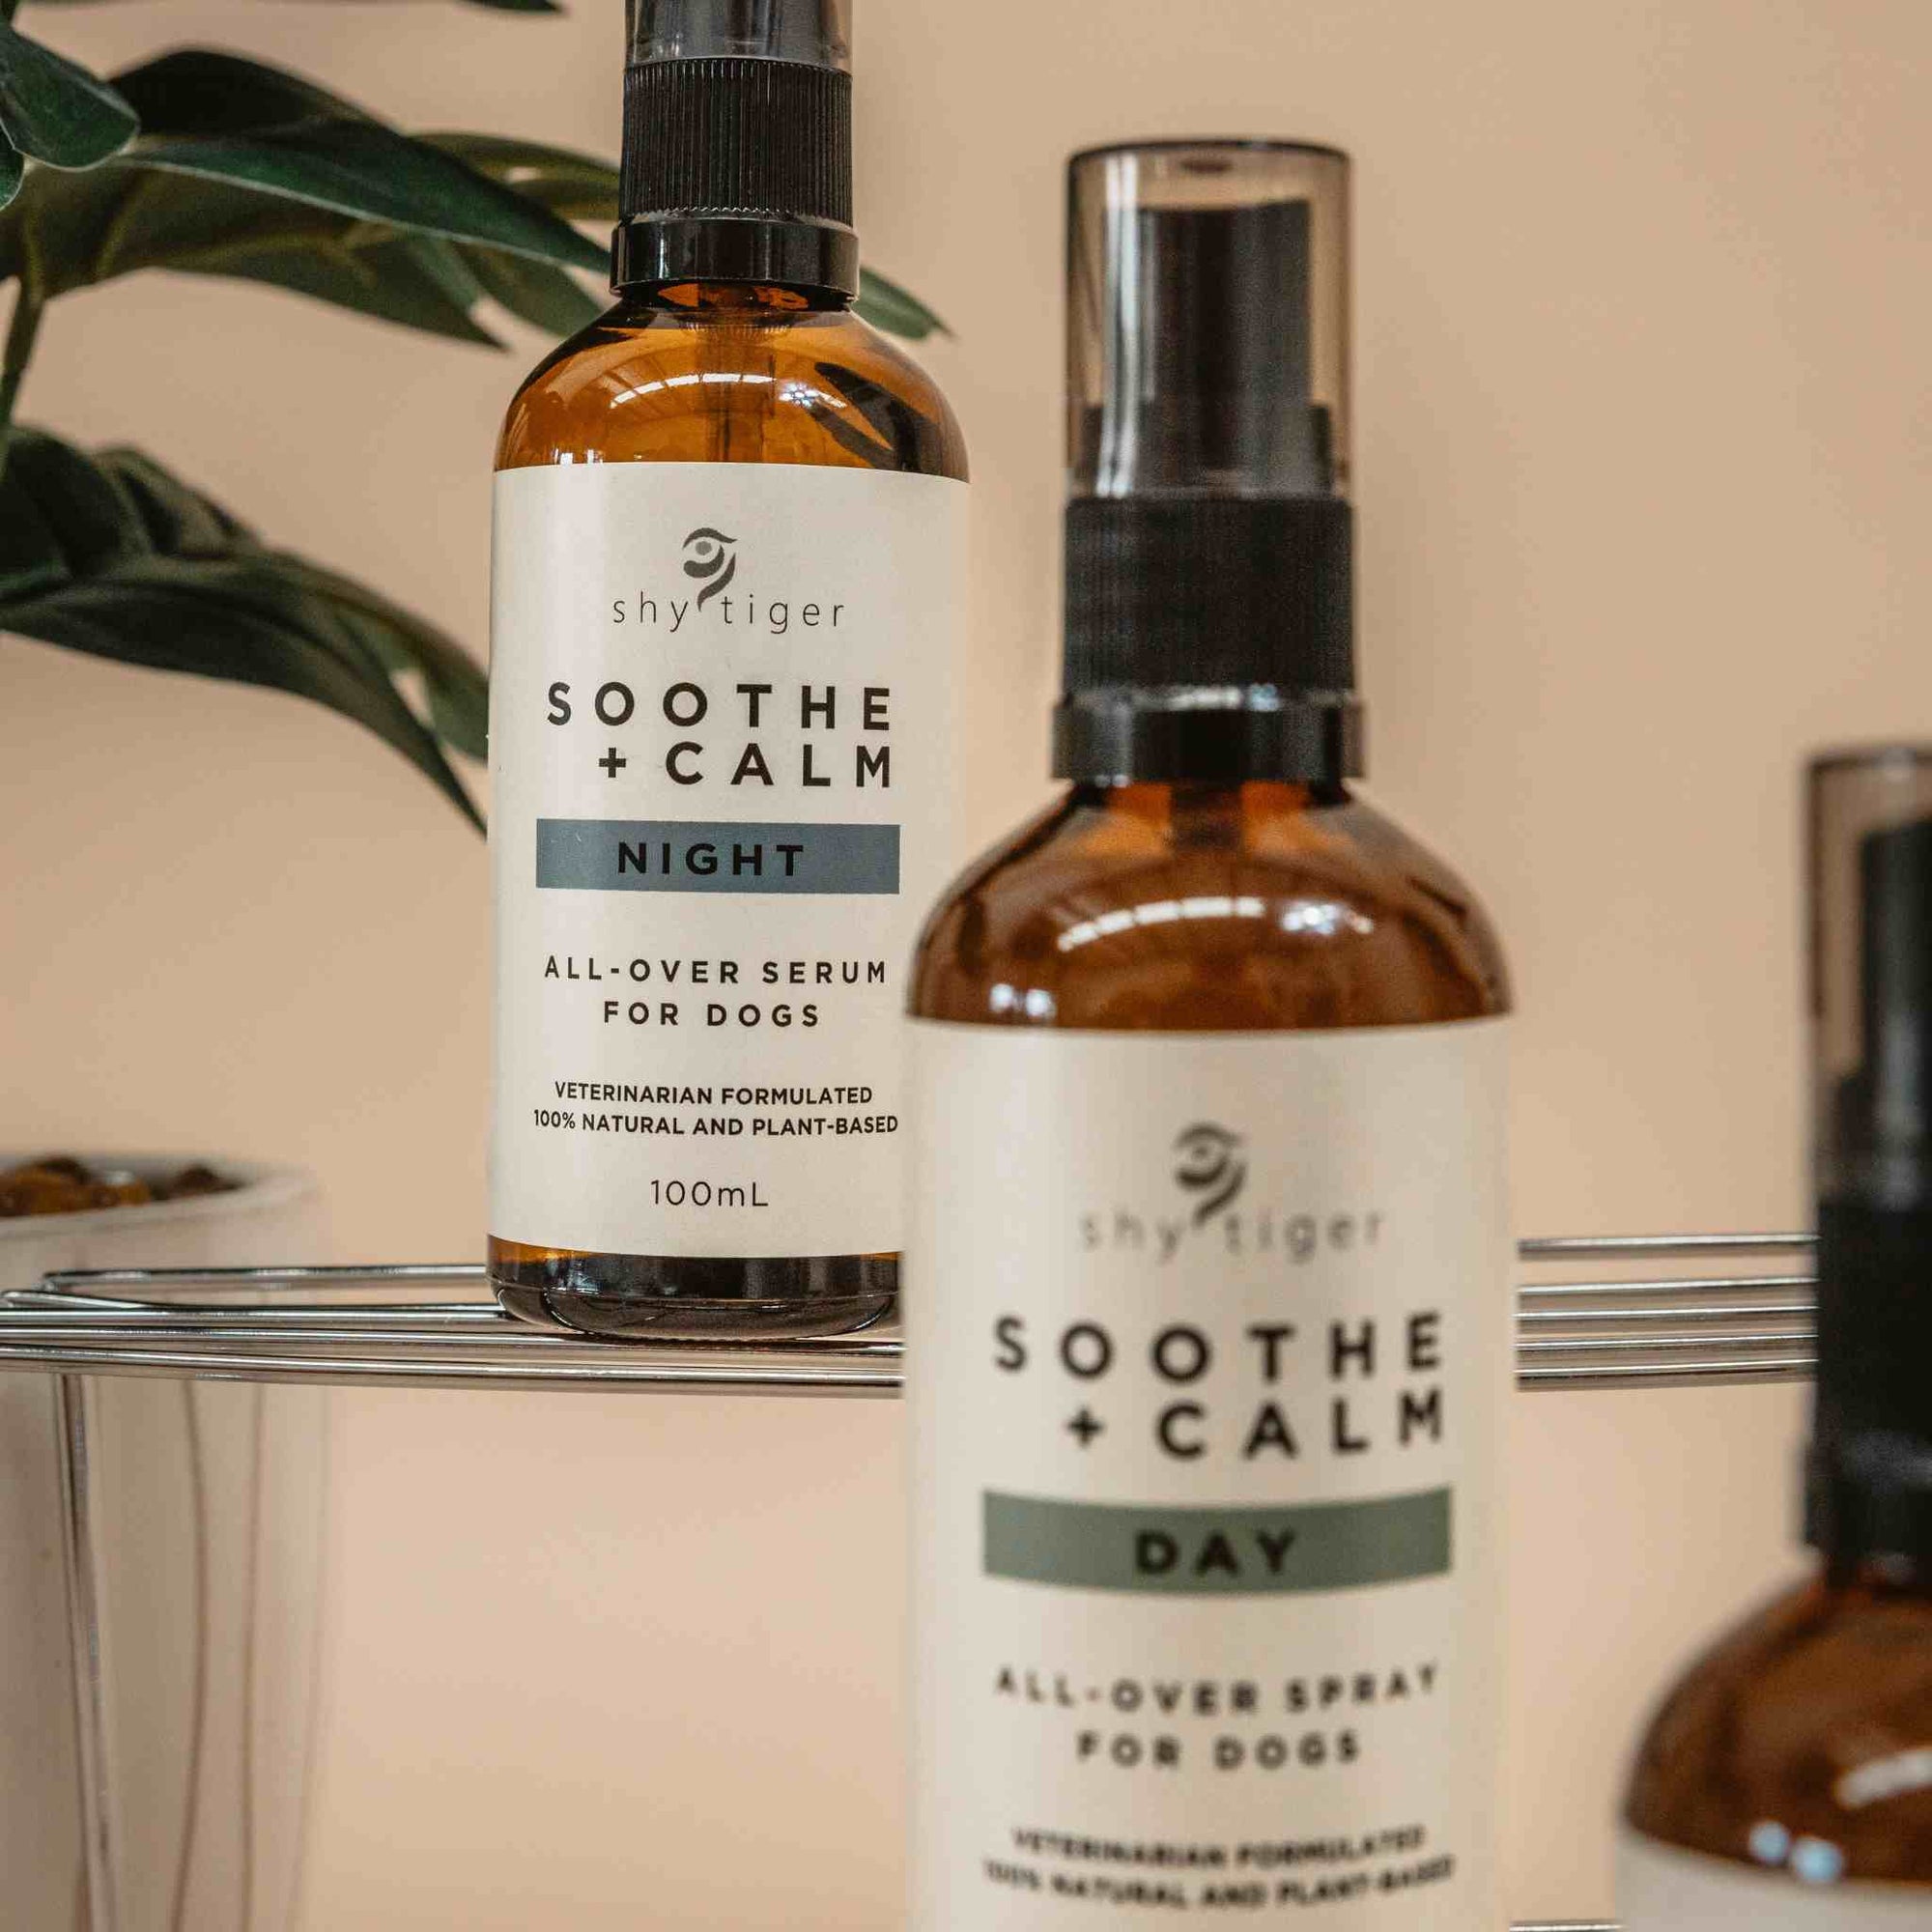 Soothe + Calm Night - Spray for dogs